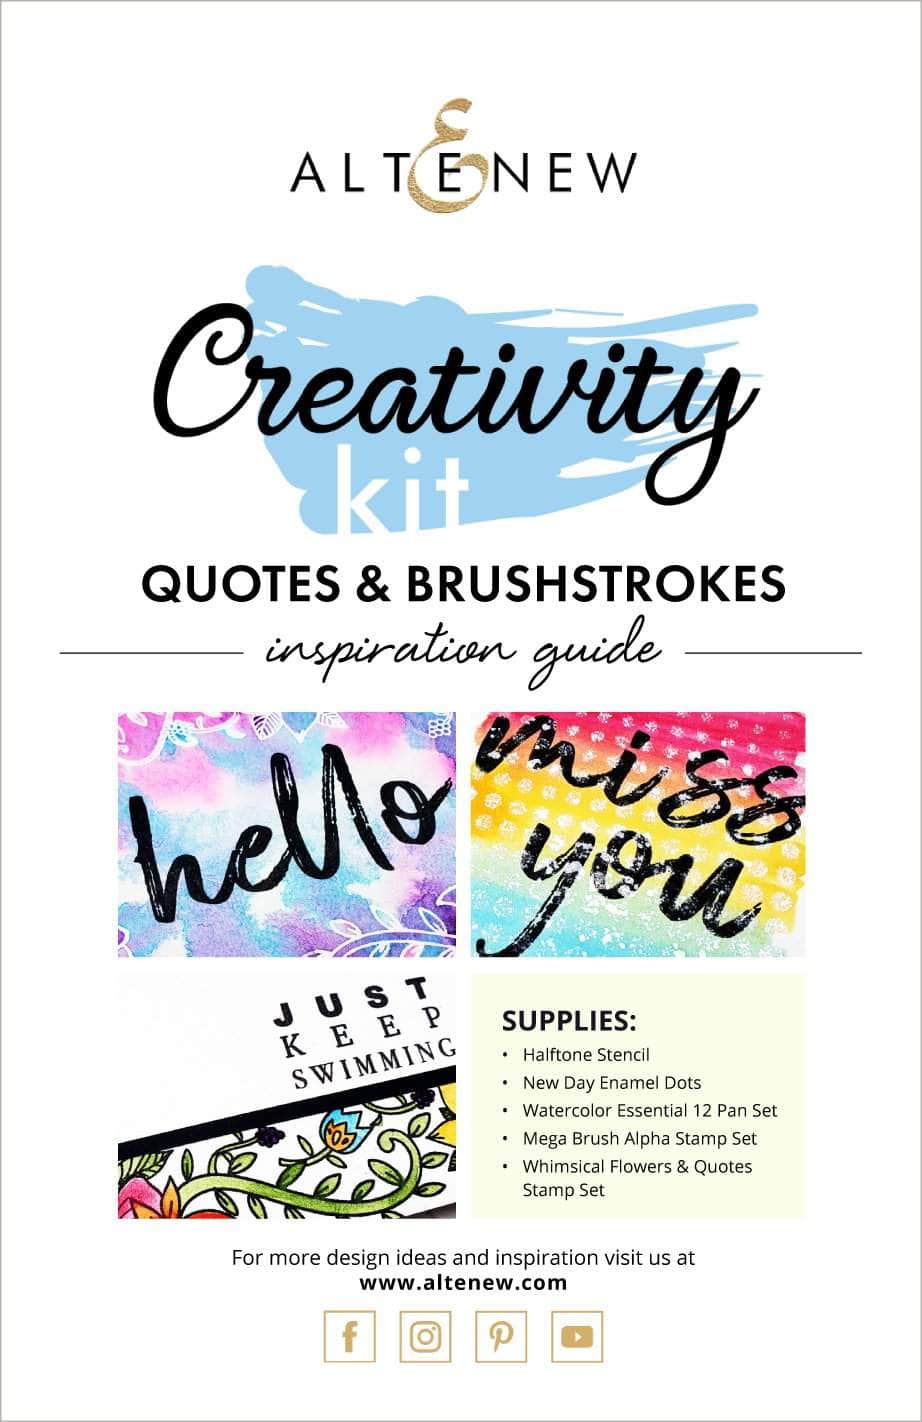 Printed Media Quotes & Brushstrokes Creativity Kit Inspiration Guide